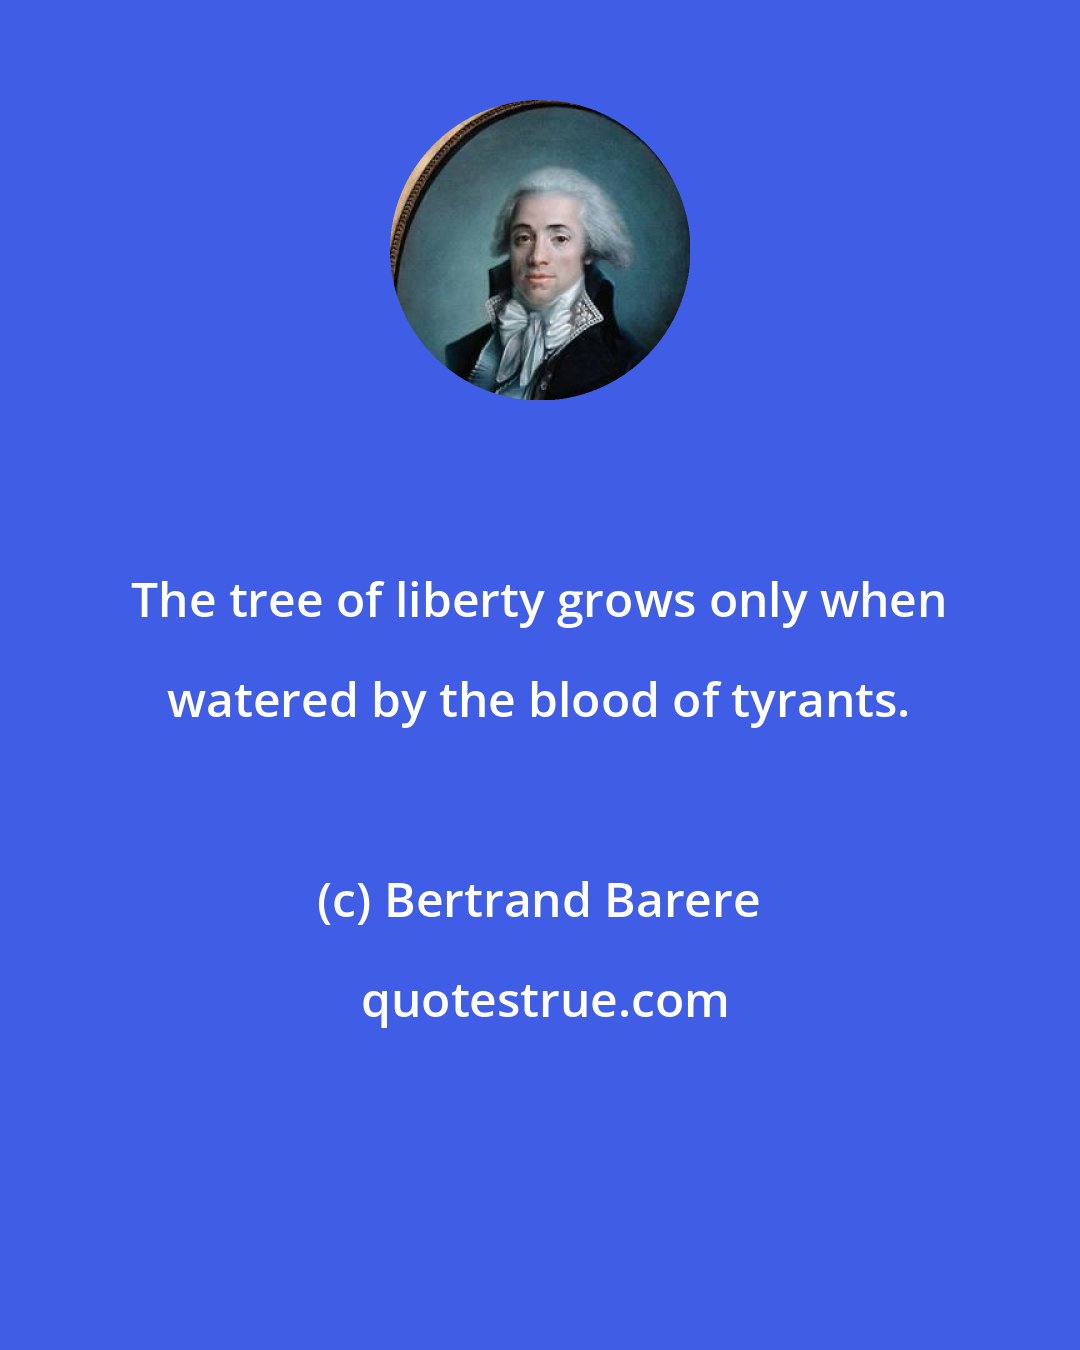 Bertrand Barere: The tree of liberty grows only when watered by the blood of tyrants.